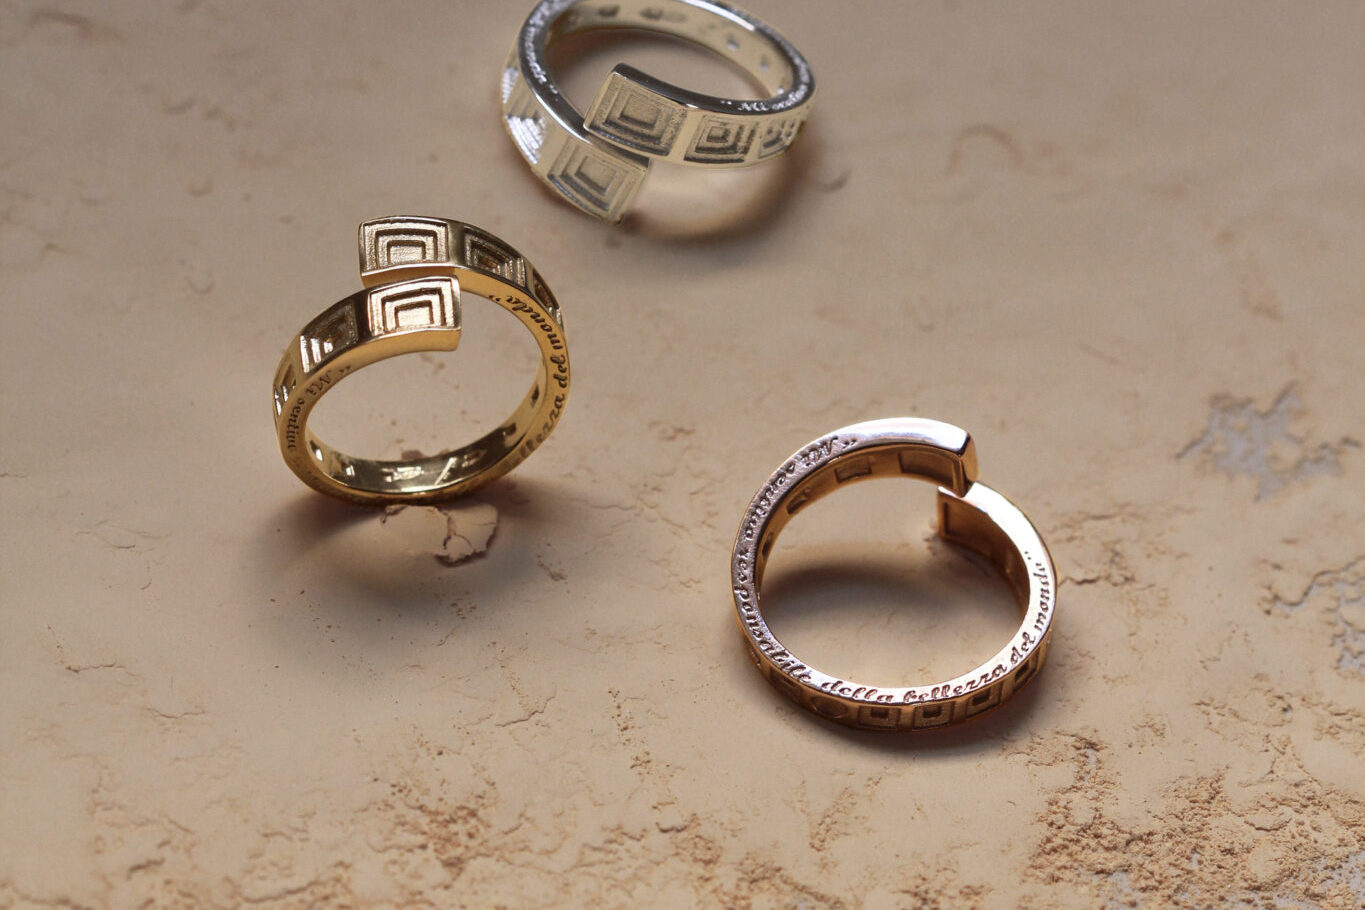 Our new ring inspired by the Pantheon of Rome